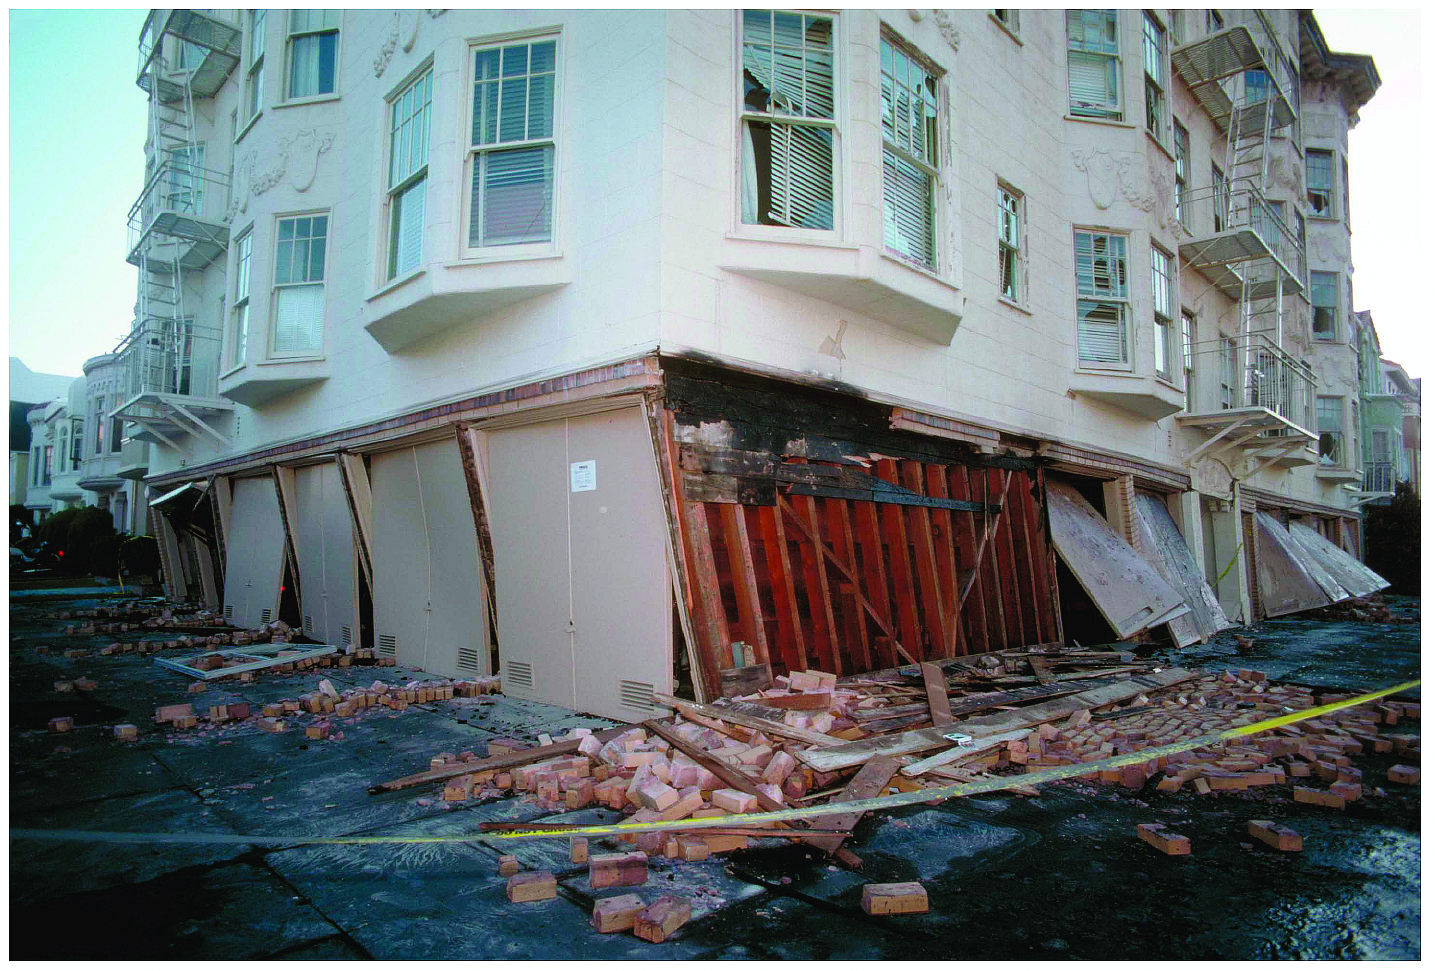 Soft story building damaged by an earthquake